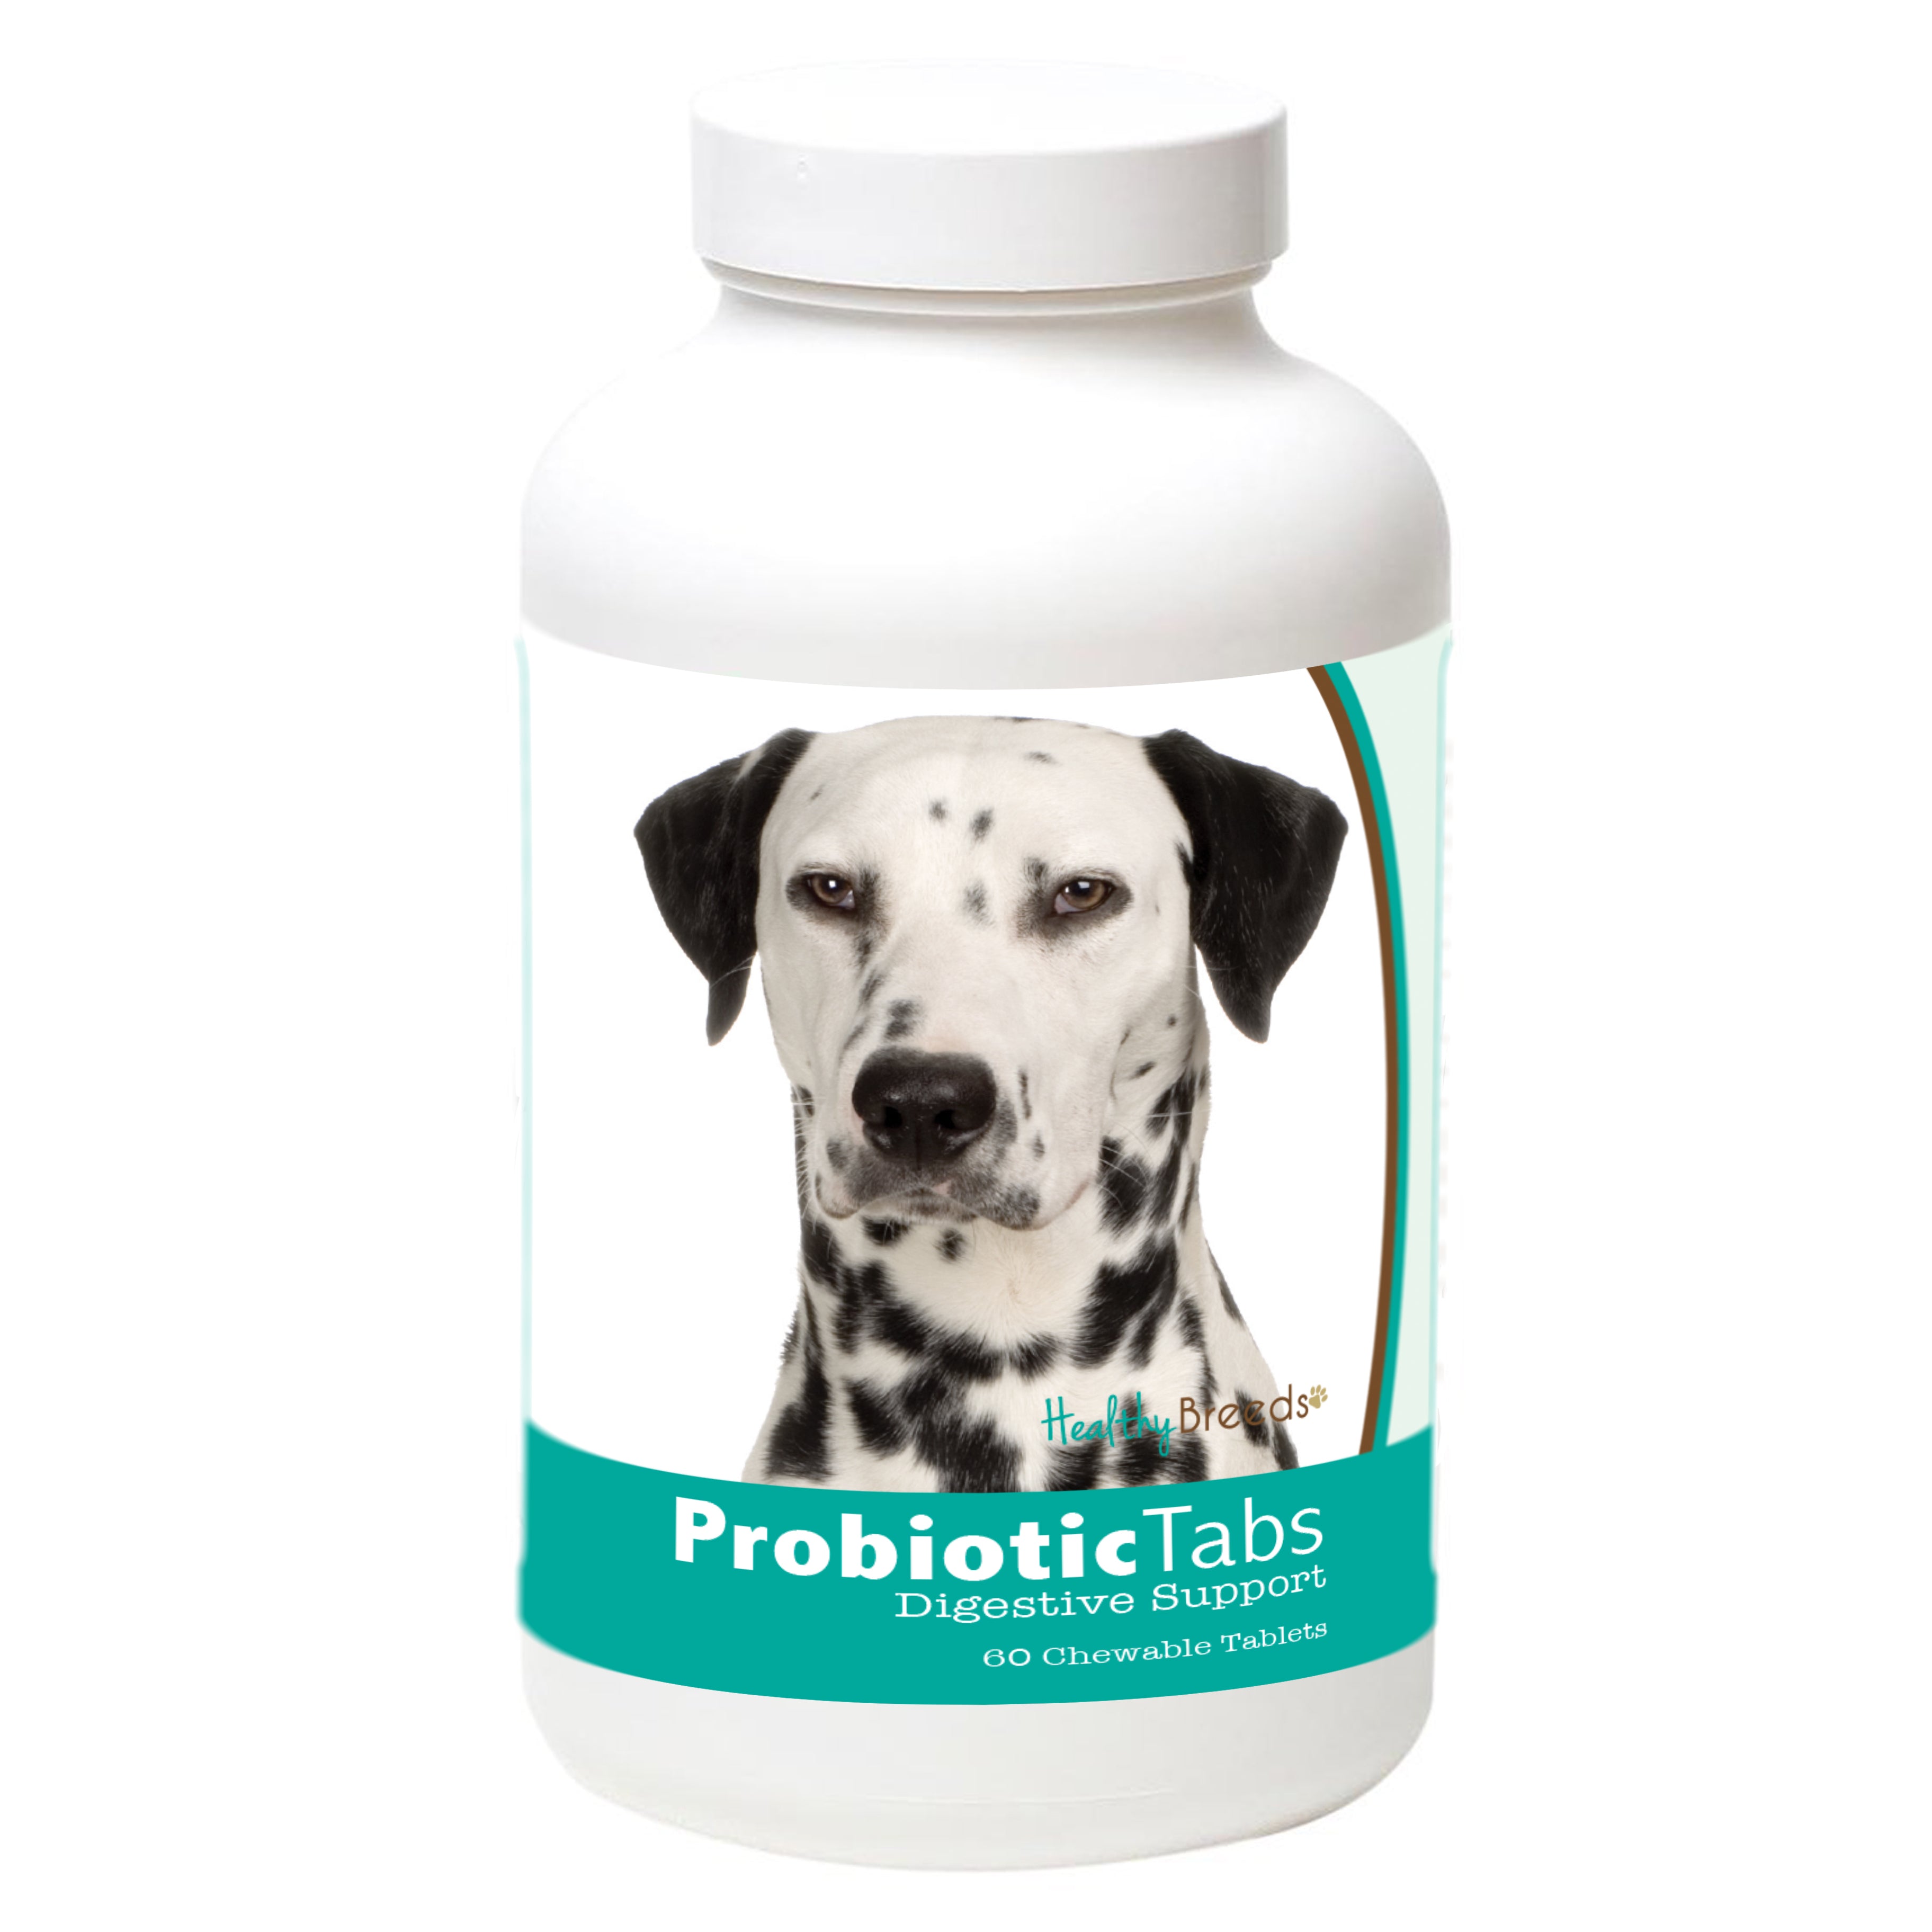 Dalmatian Probiotic and Digestive Support for Dogs 60 Count